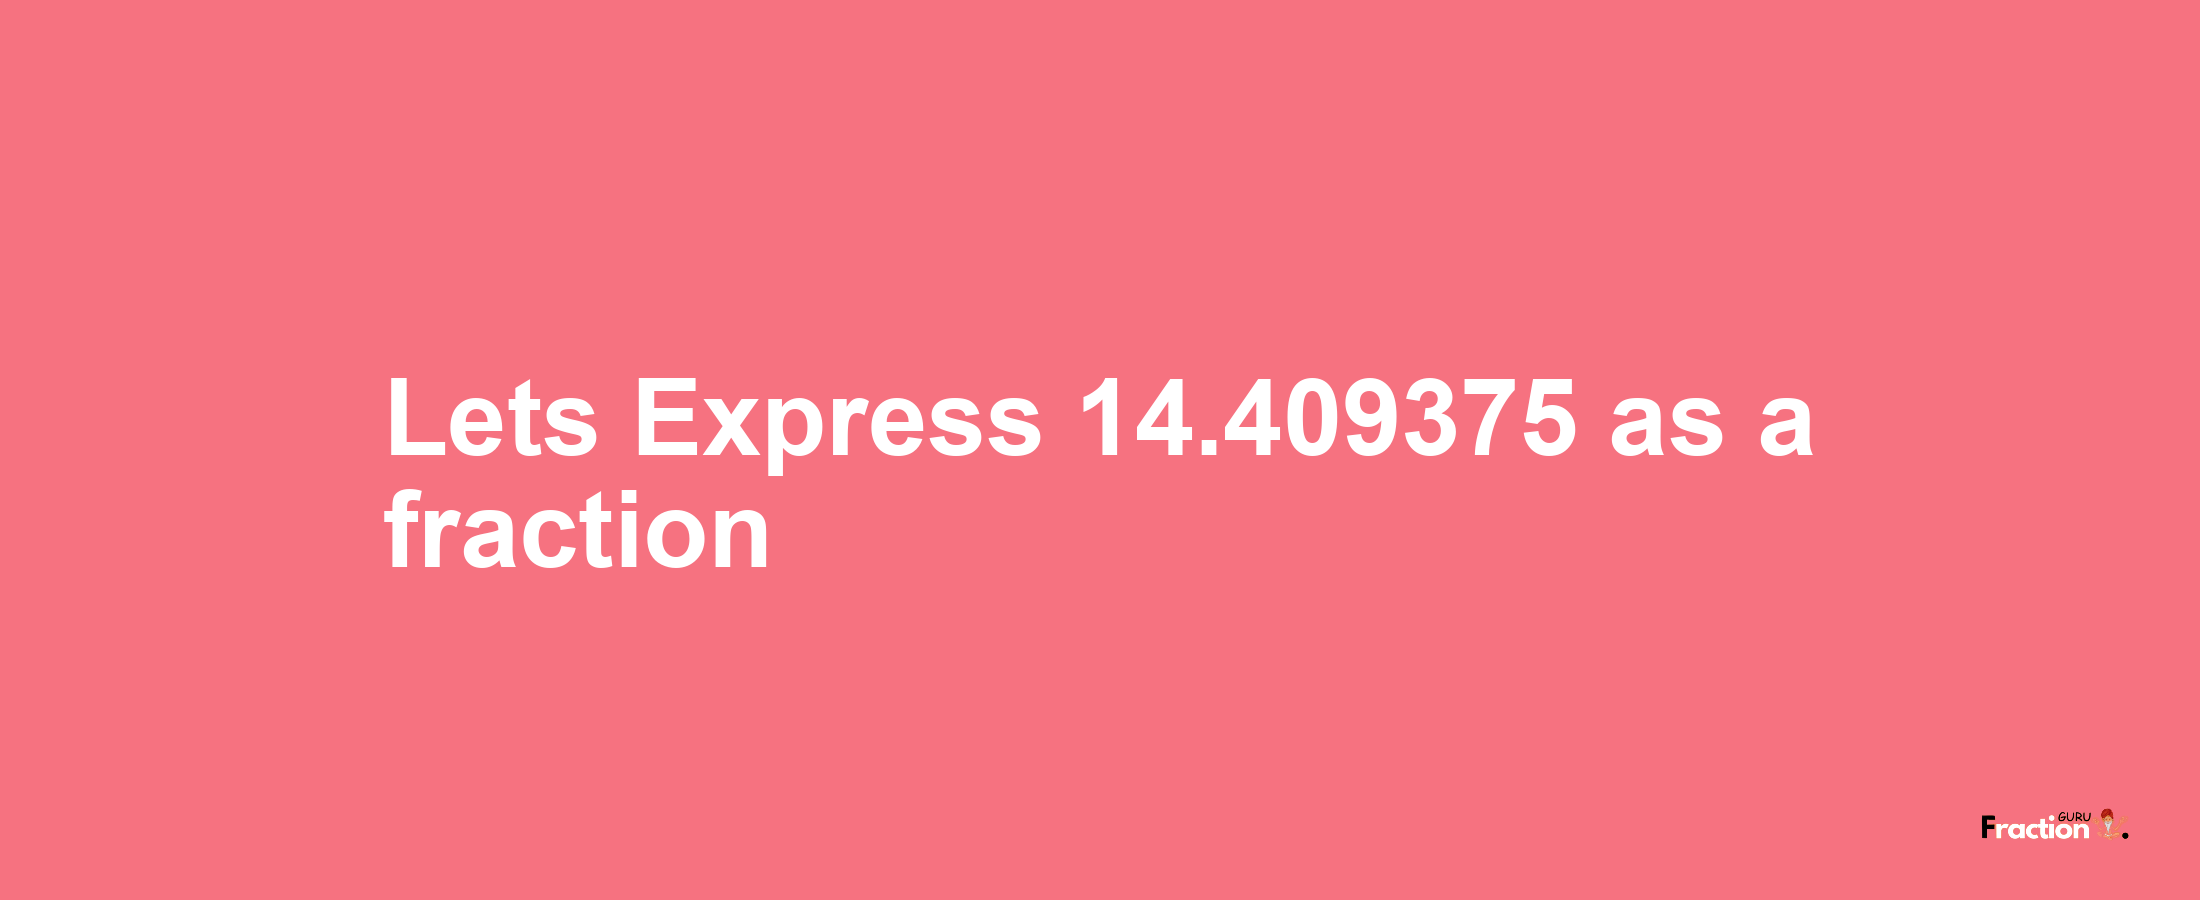 Lets Express 14.409375 as afraction